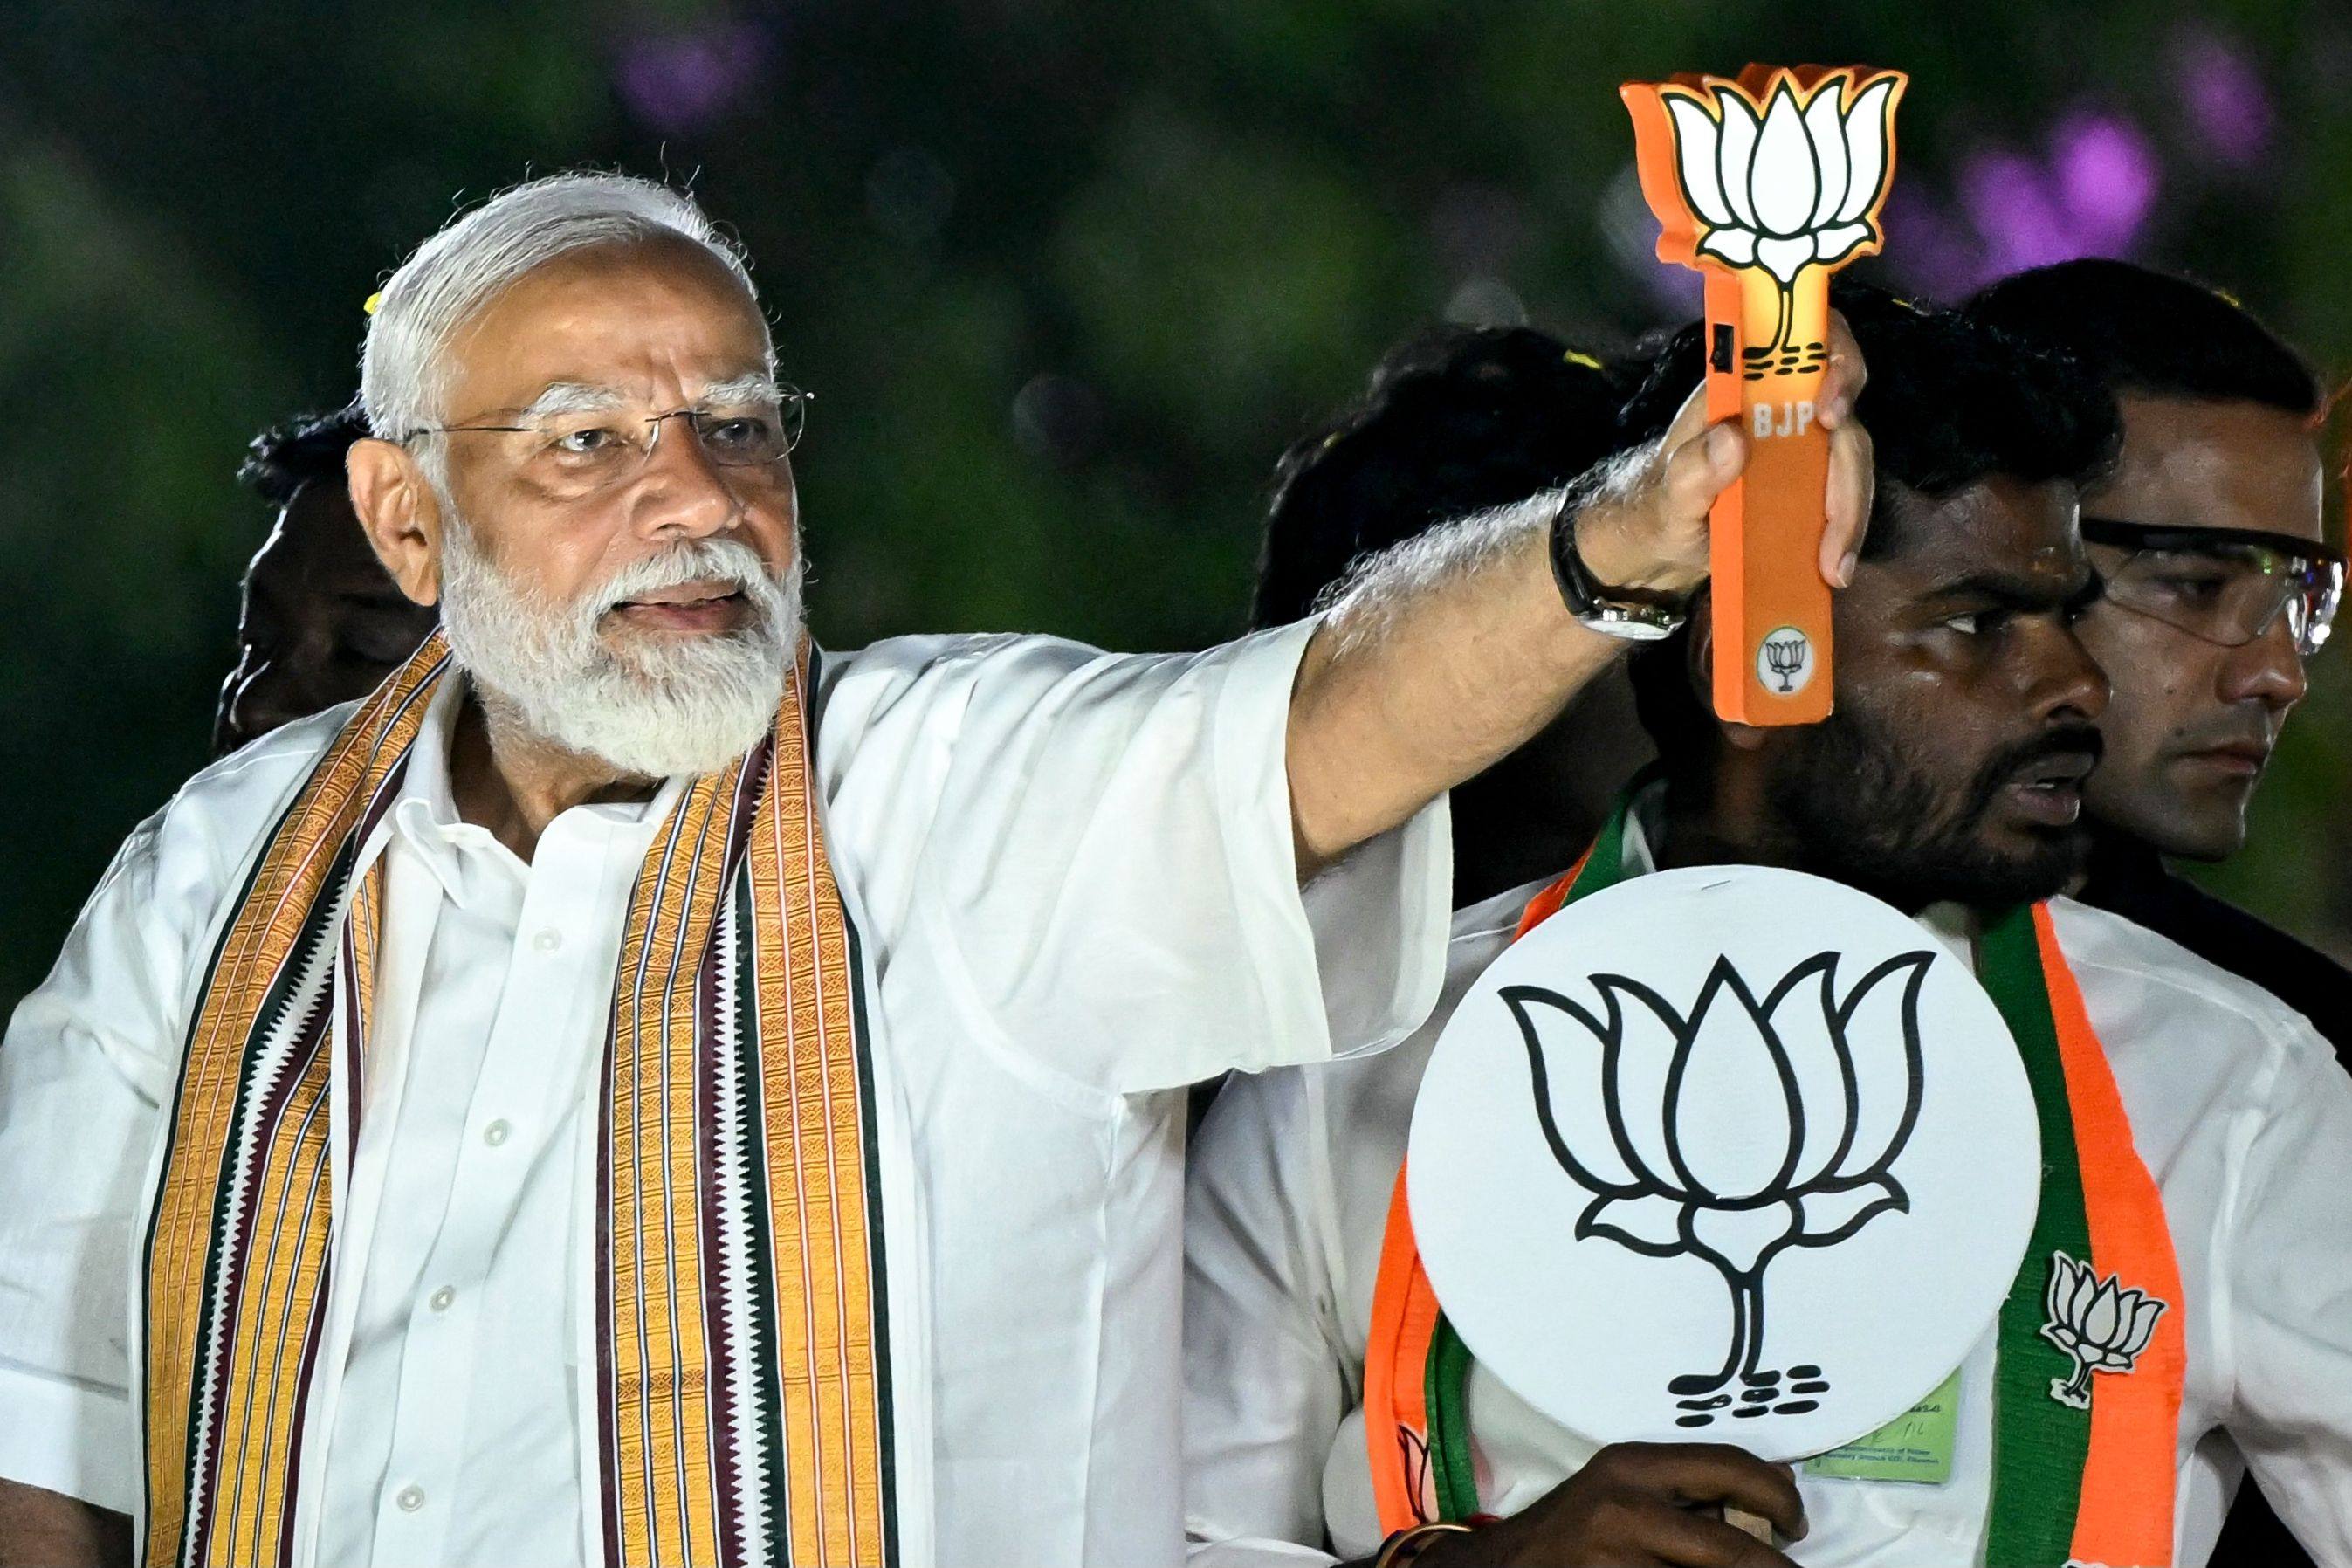 Indian Prime Minister Narendra Modi (left) holds up the ruling Bharatiya Janata Party’s symbol during a road show in Chennai, the capital of the state of Tamil Nadu, on April 9. Photo: AFP